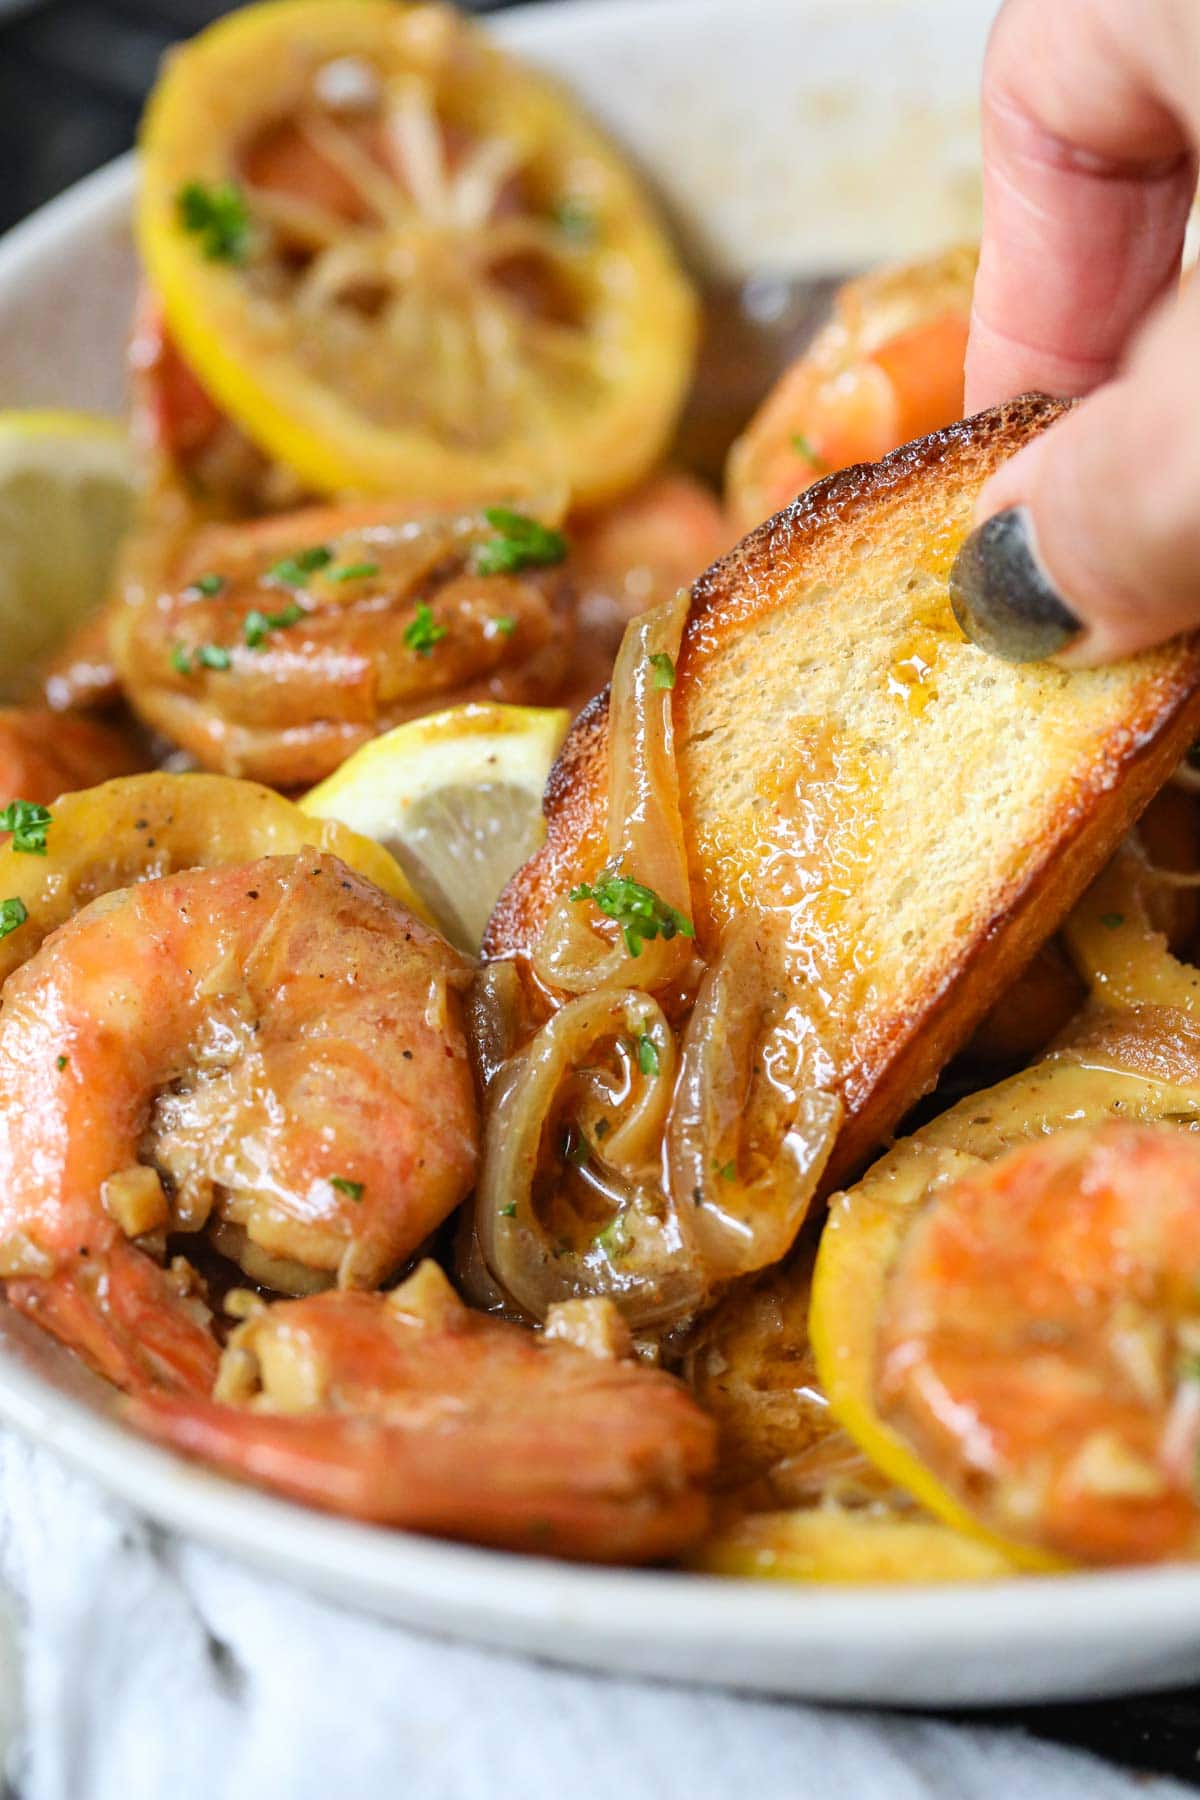 A slice of toasted bread being dipped into a bowl of New Orleans barbecue shrimp.